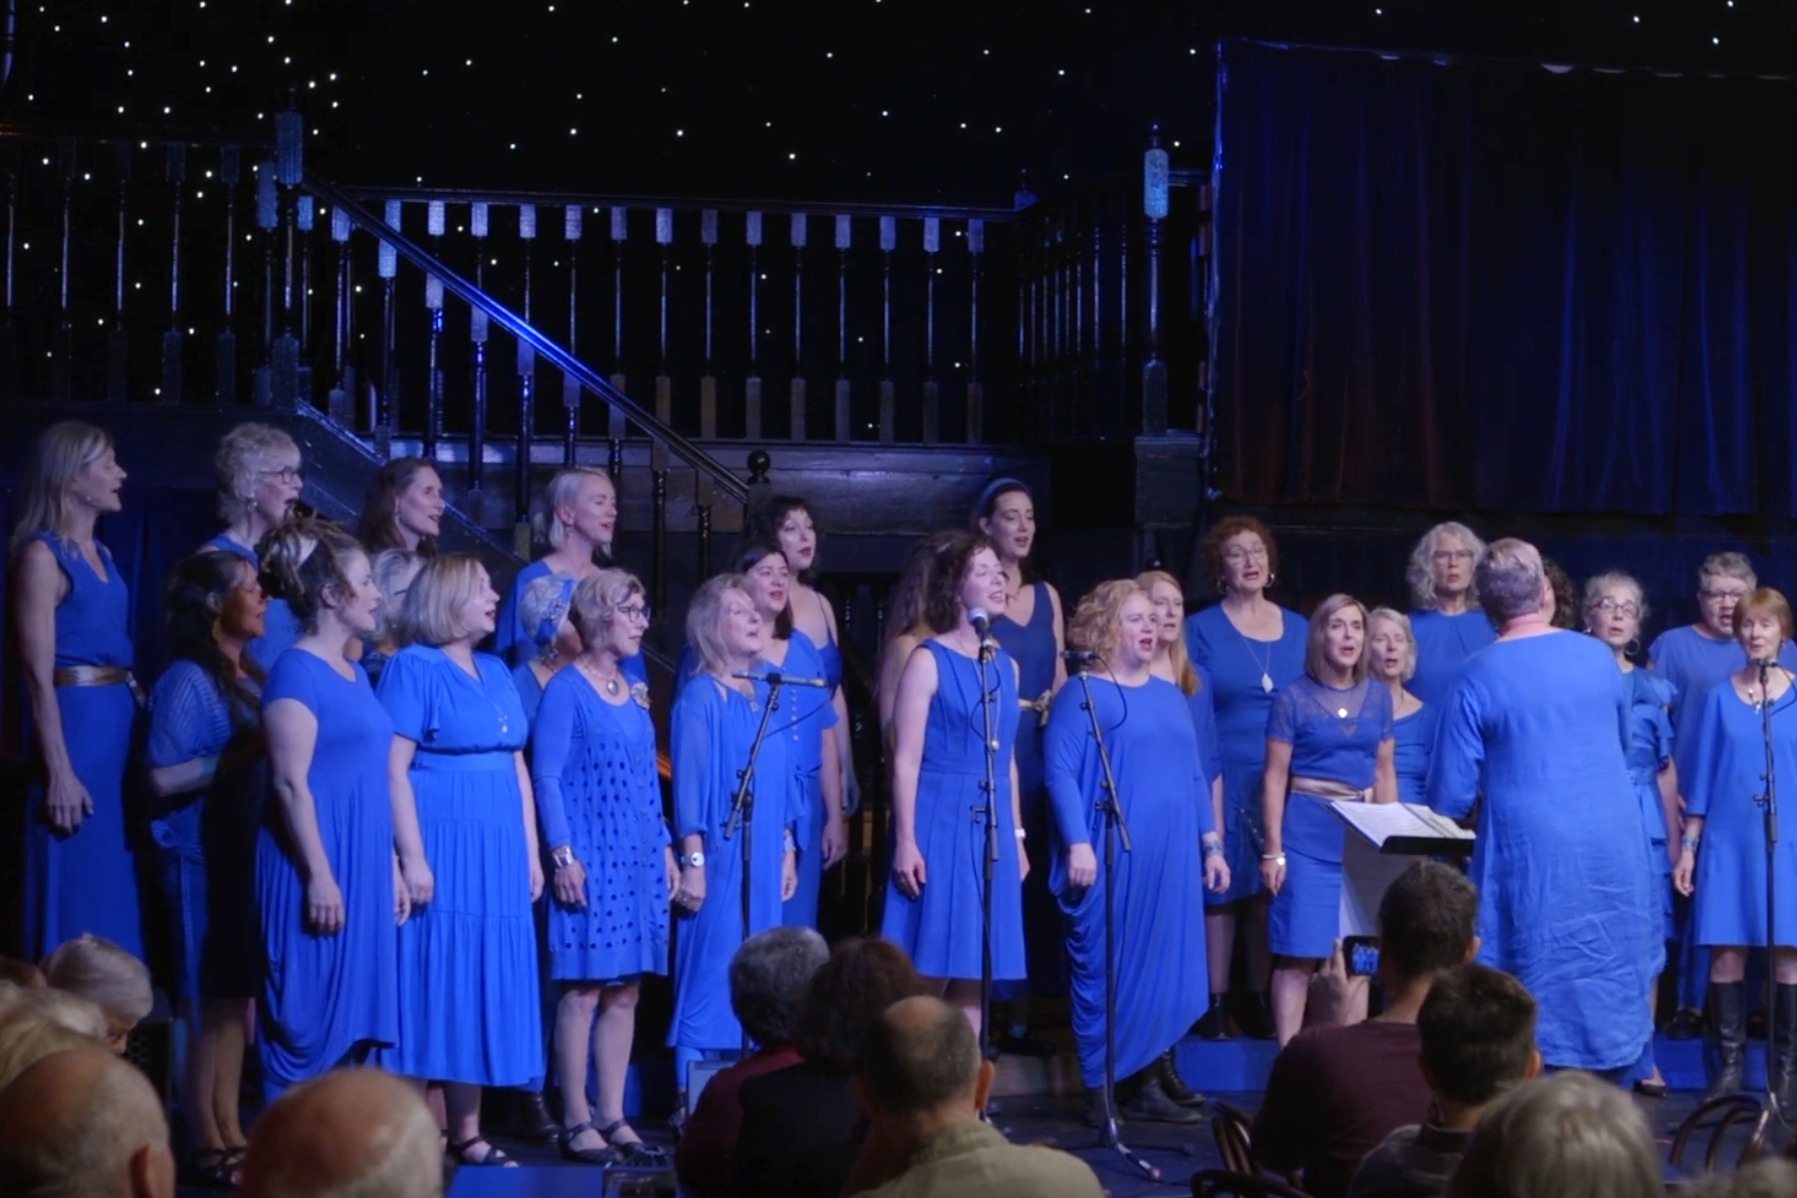 The Brunswick Women's Choir performs as part of the Shake It Up! 2022 showcase performance.